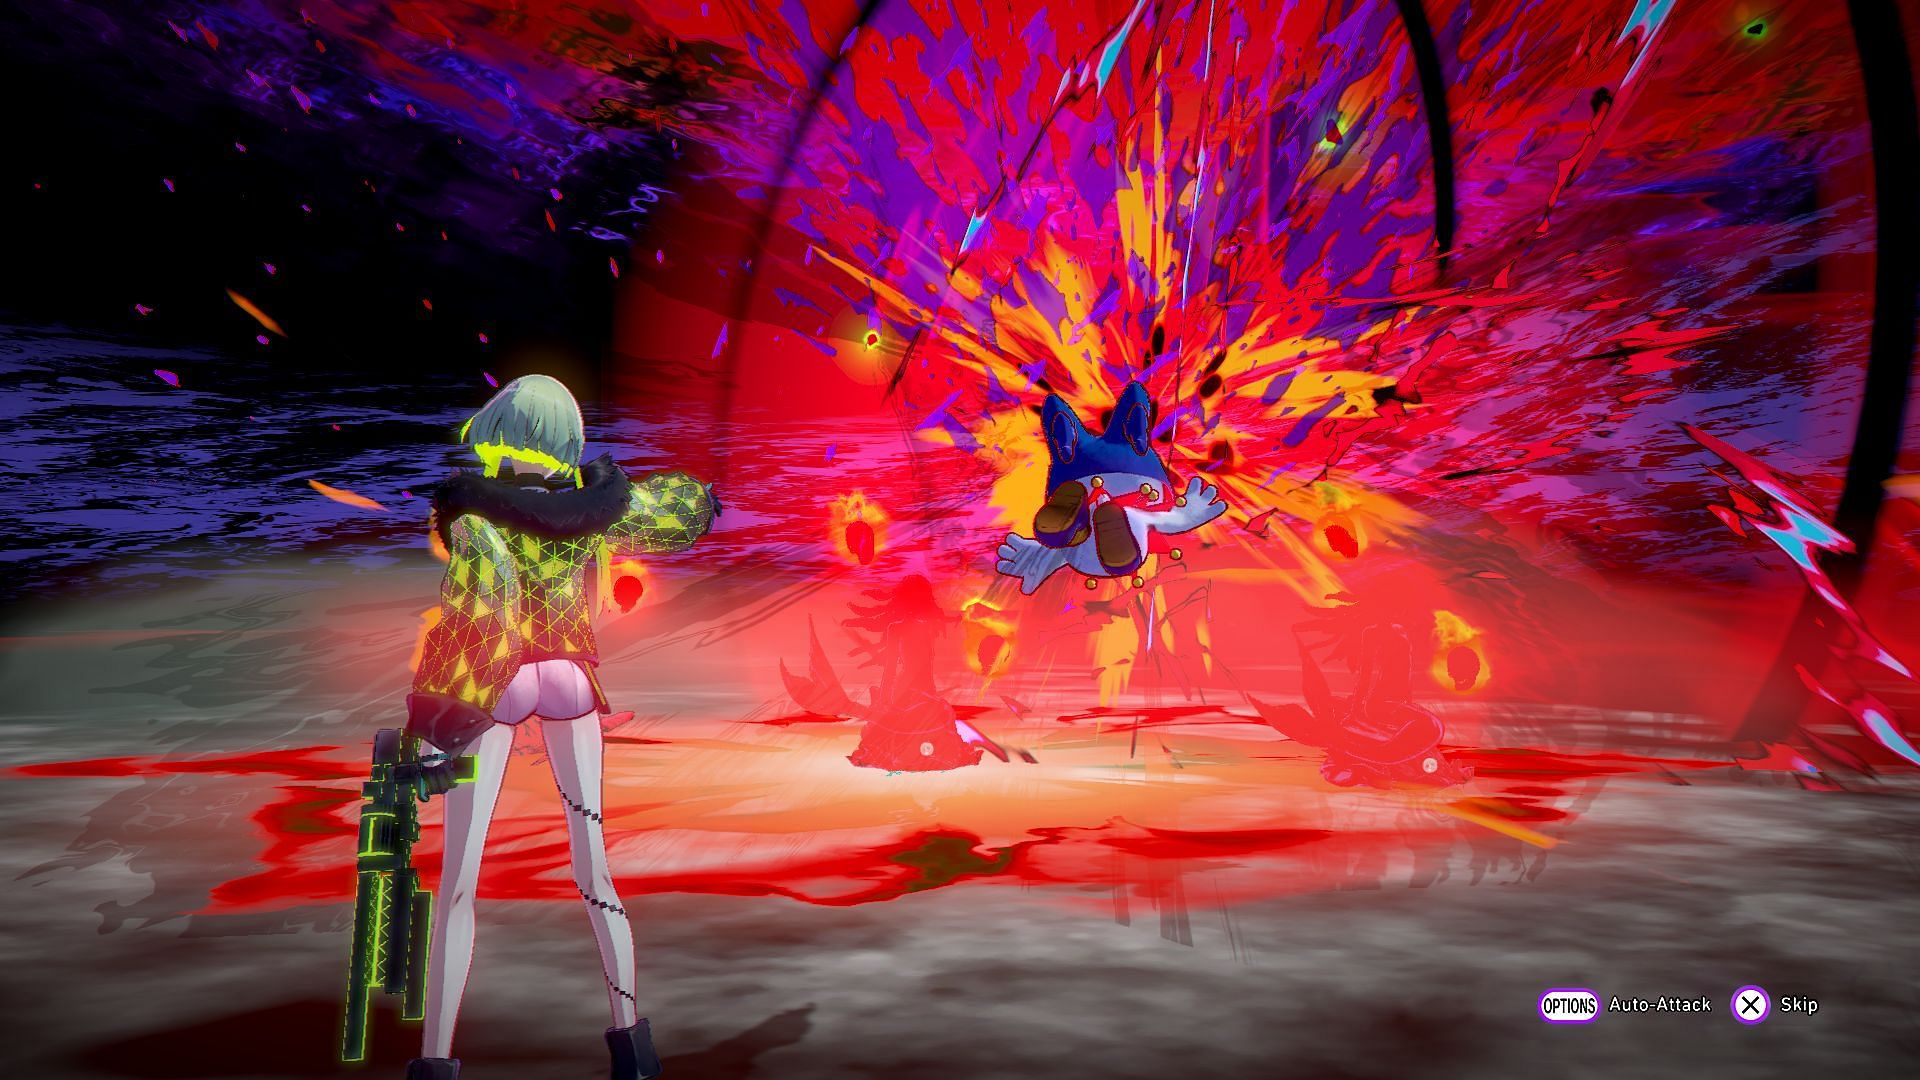 By exploiting enemy weaknesses, Sabbath will pay big dividends in combat (Image via Atlus)